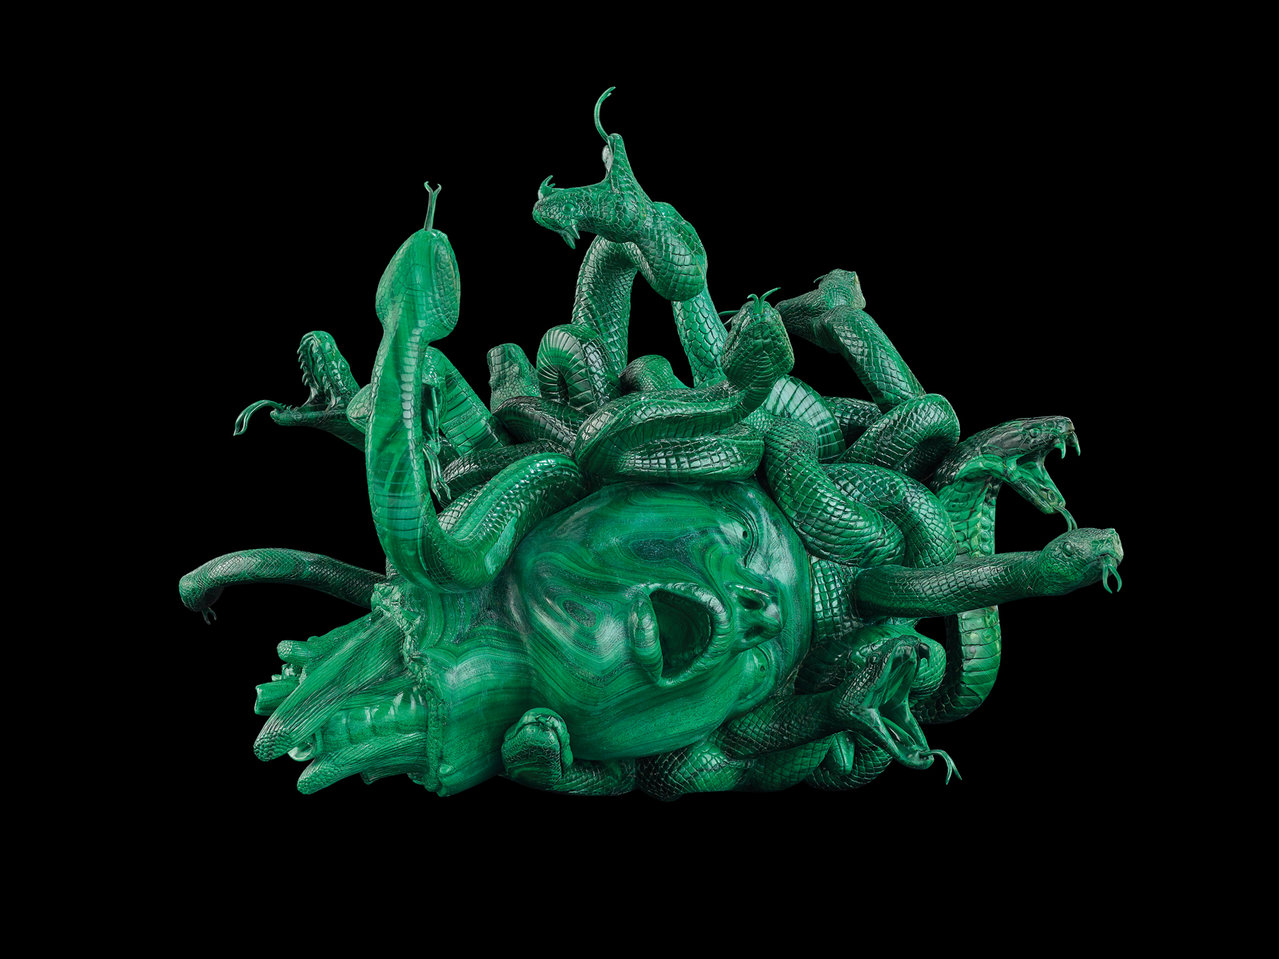 'The Severed Head of Medusa' Photographed by Prudence Cuming Associates  © Damien Hirst and Science Ltd. All rights reserved, DACS 2017